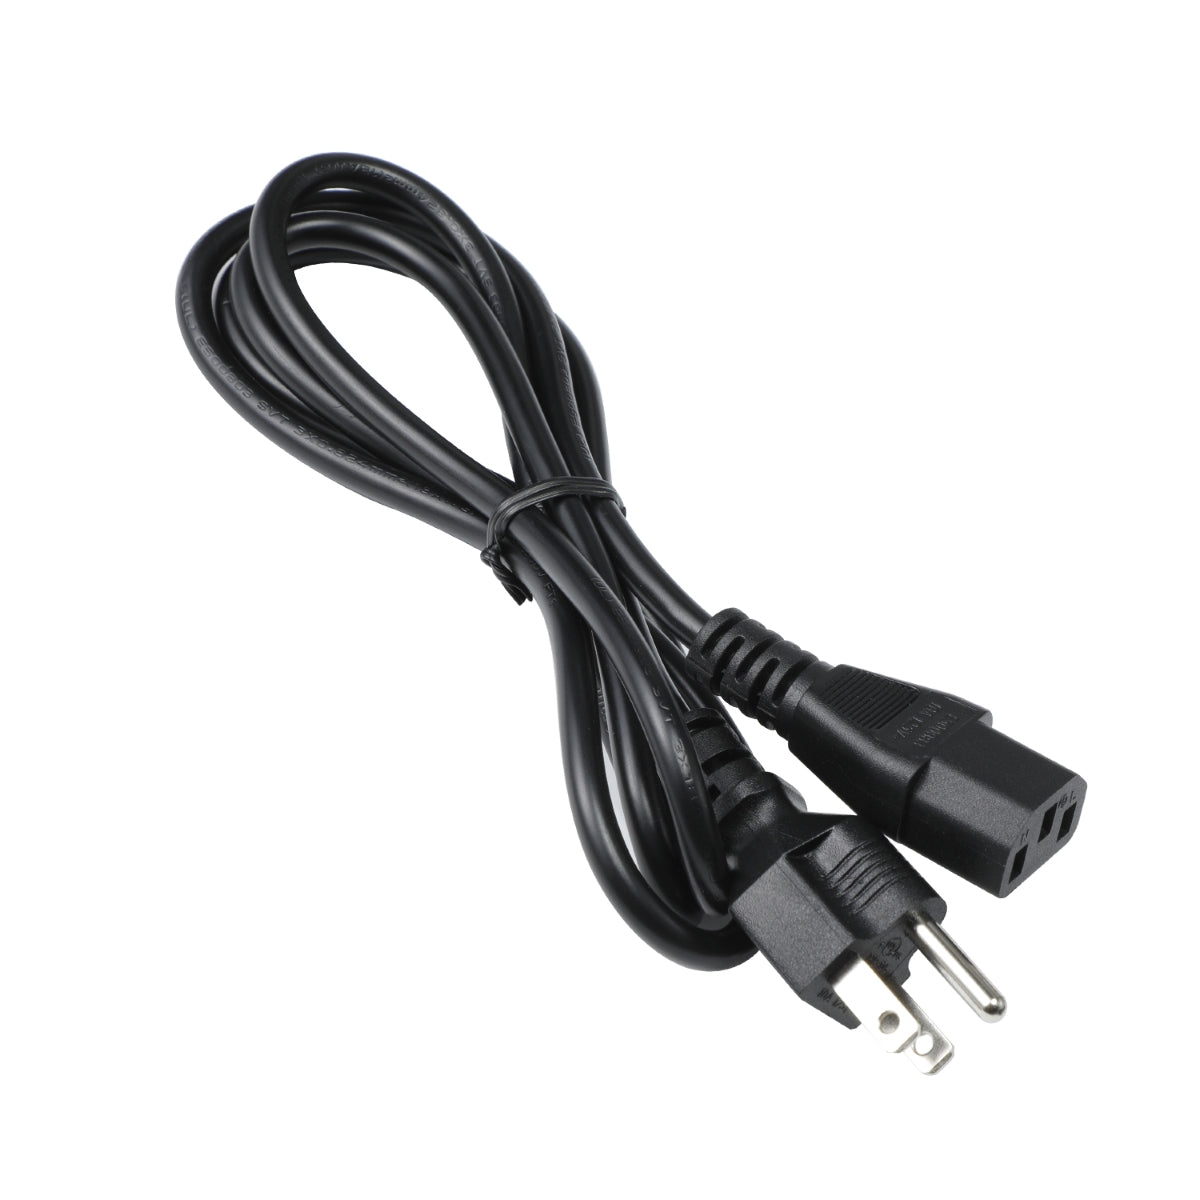 Power Cord for ViewSonic VG2456a Display